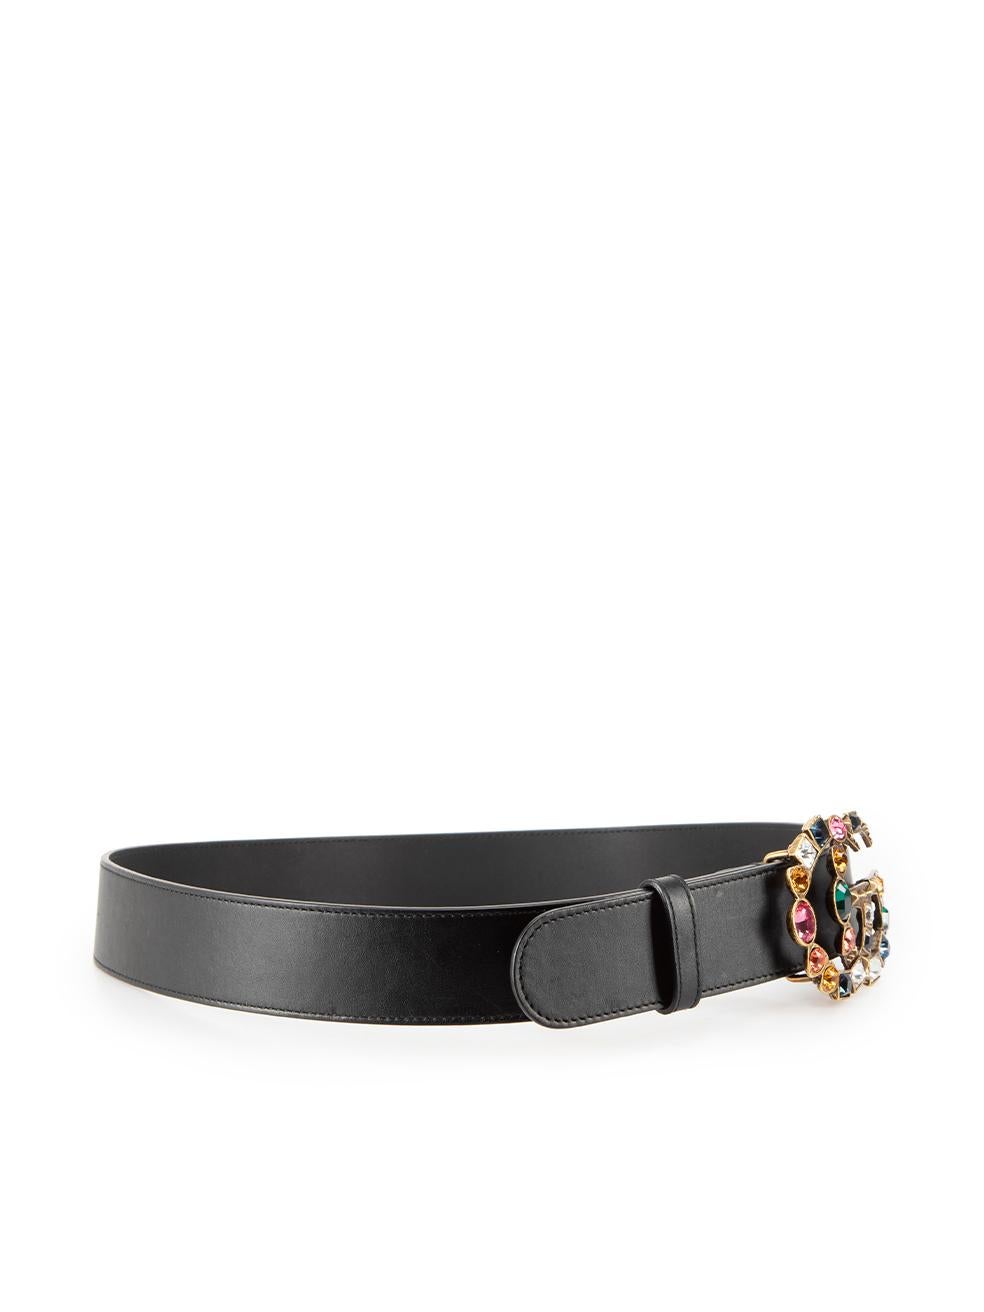 CONDITION is Very good. Hardly any visible wear to belt is evident on this used Gucci designer resale item.



Details


Black

Leather

Belt

Multicolour crystal 'GG' buckle



 

Made in Italy 

 

Composition

EXTERIOR: Leather



Size &